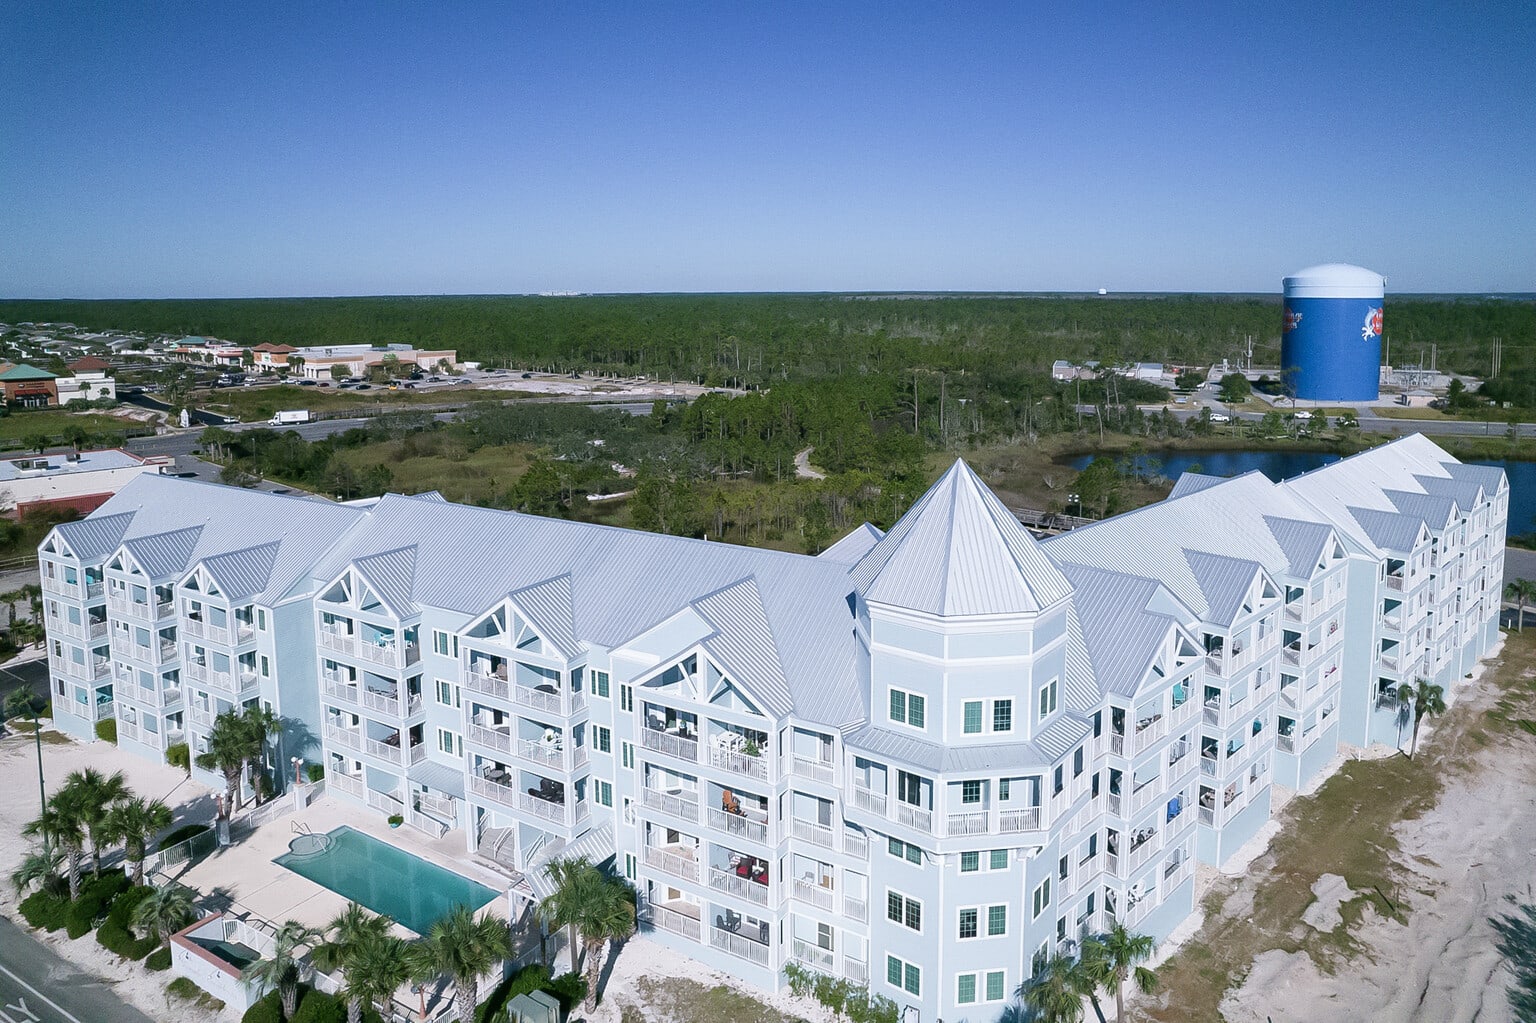 Condo directly across from beach pool